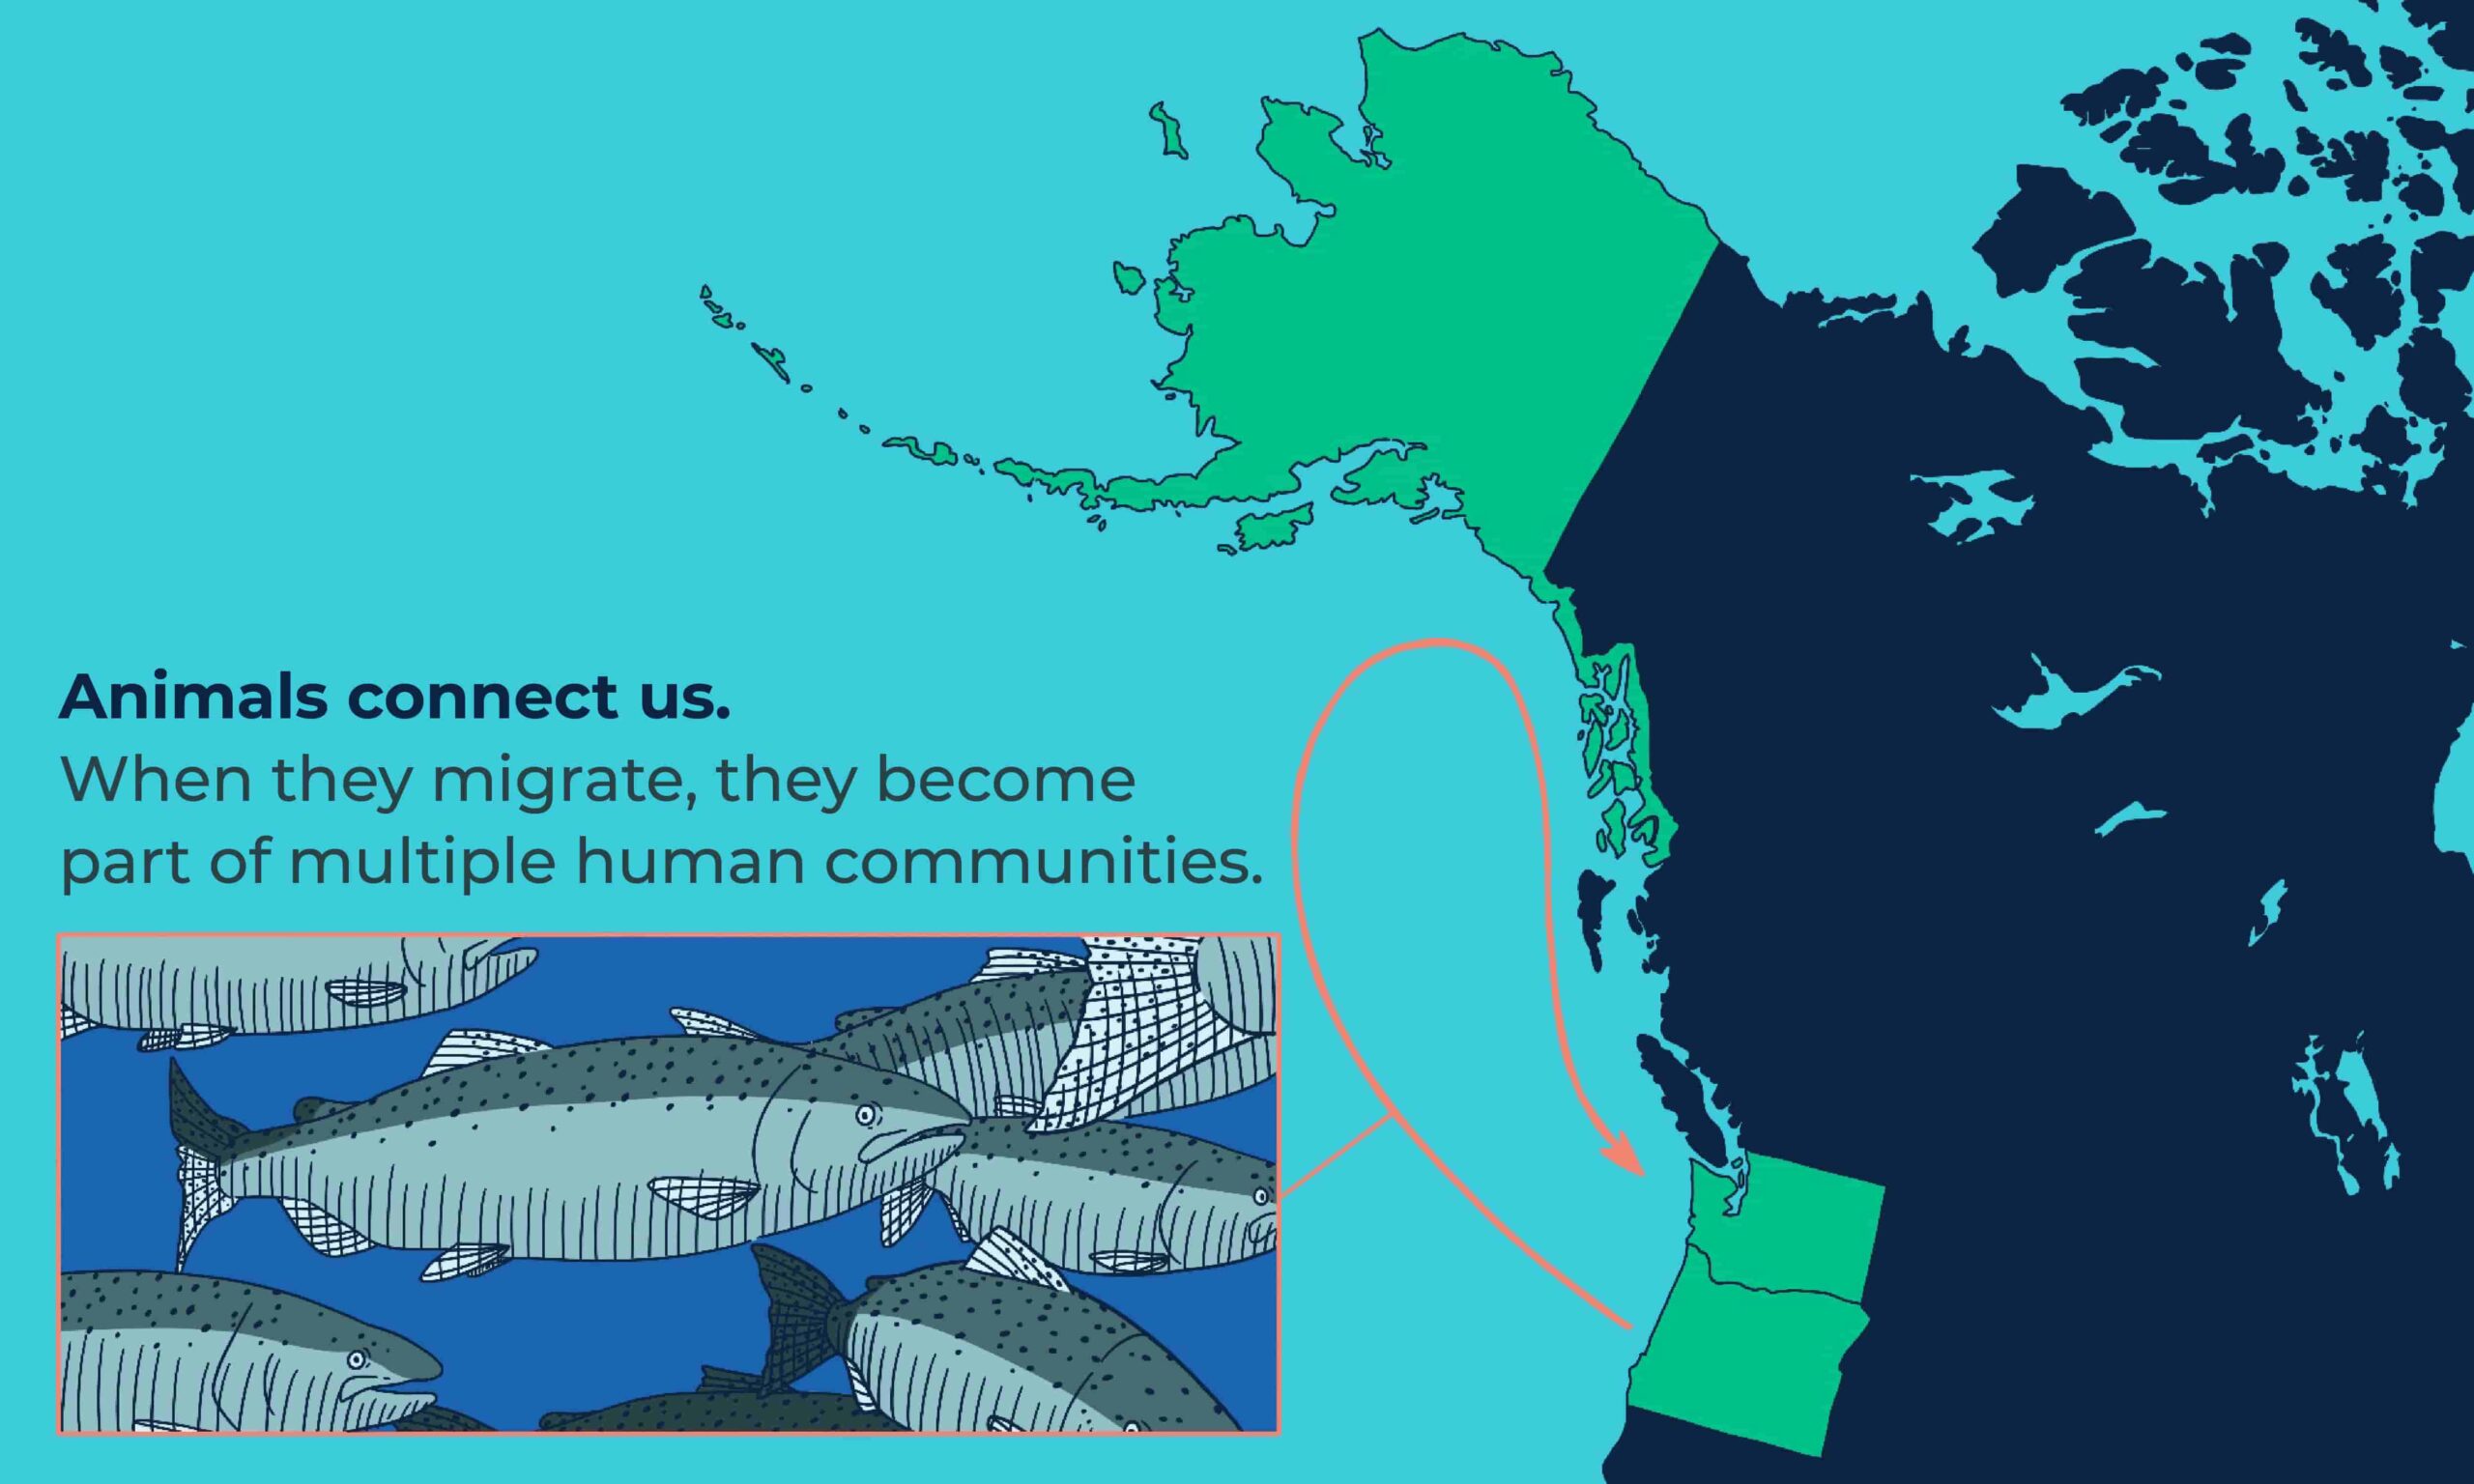 An illustration of the North American west coast shoreline. The states of Alaska, Washington, and Oregon are highlighted. An orange arrow goes from Oregon, up to Alaska, and then back down to Washington. Text on the image reads "Animals connect us. When they migrate, they become part of multiple human communities." Beneath this text is an illustration of a school of salmon.